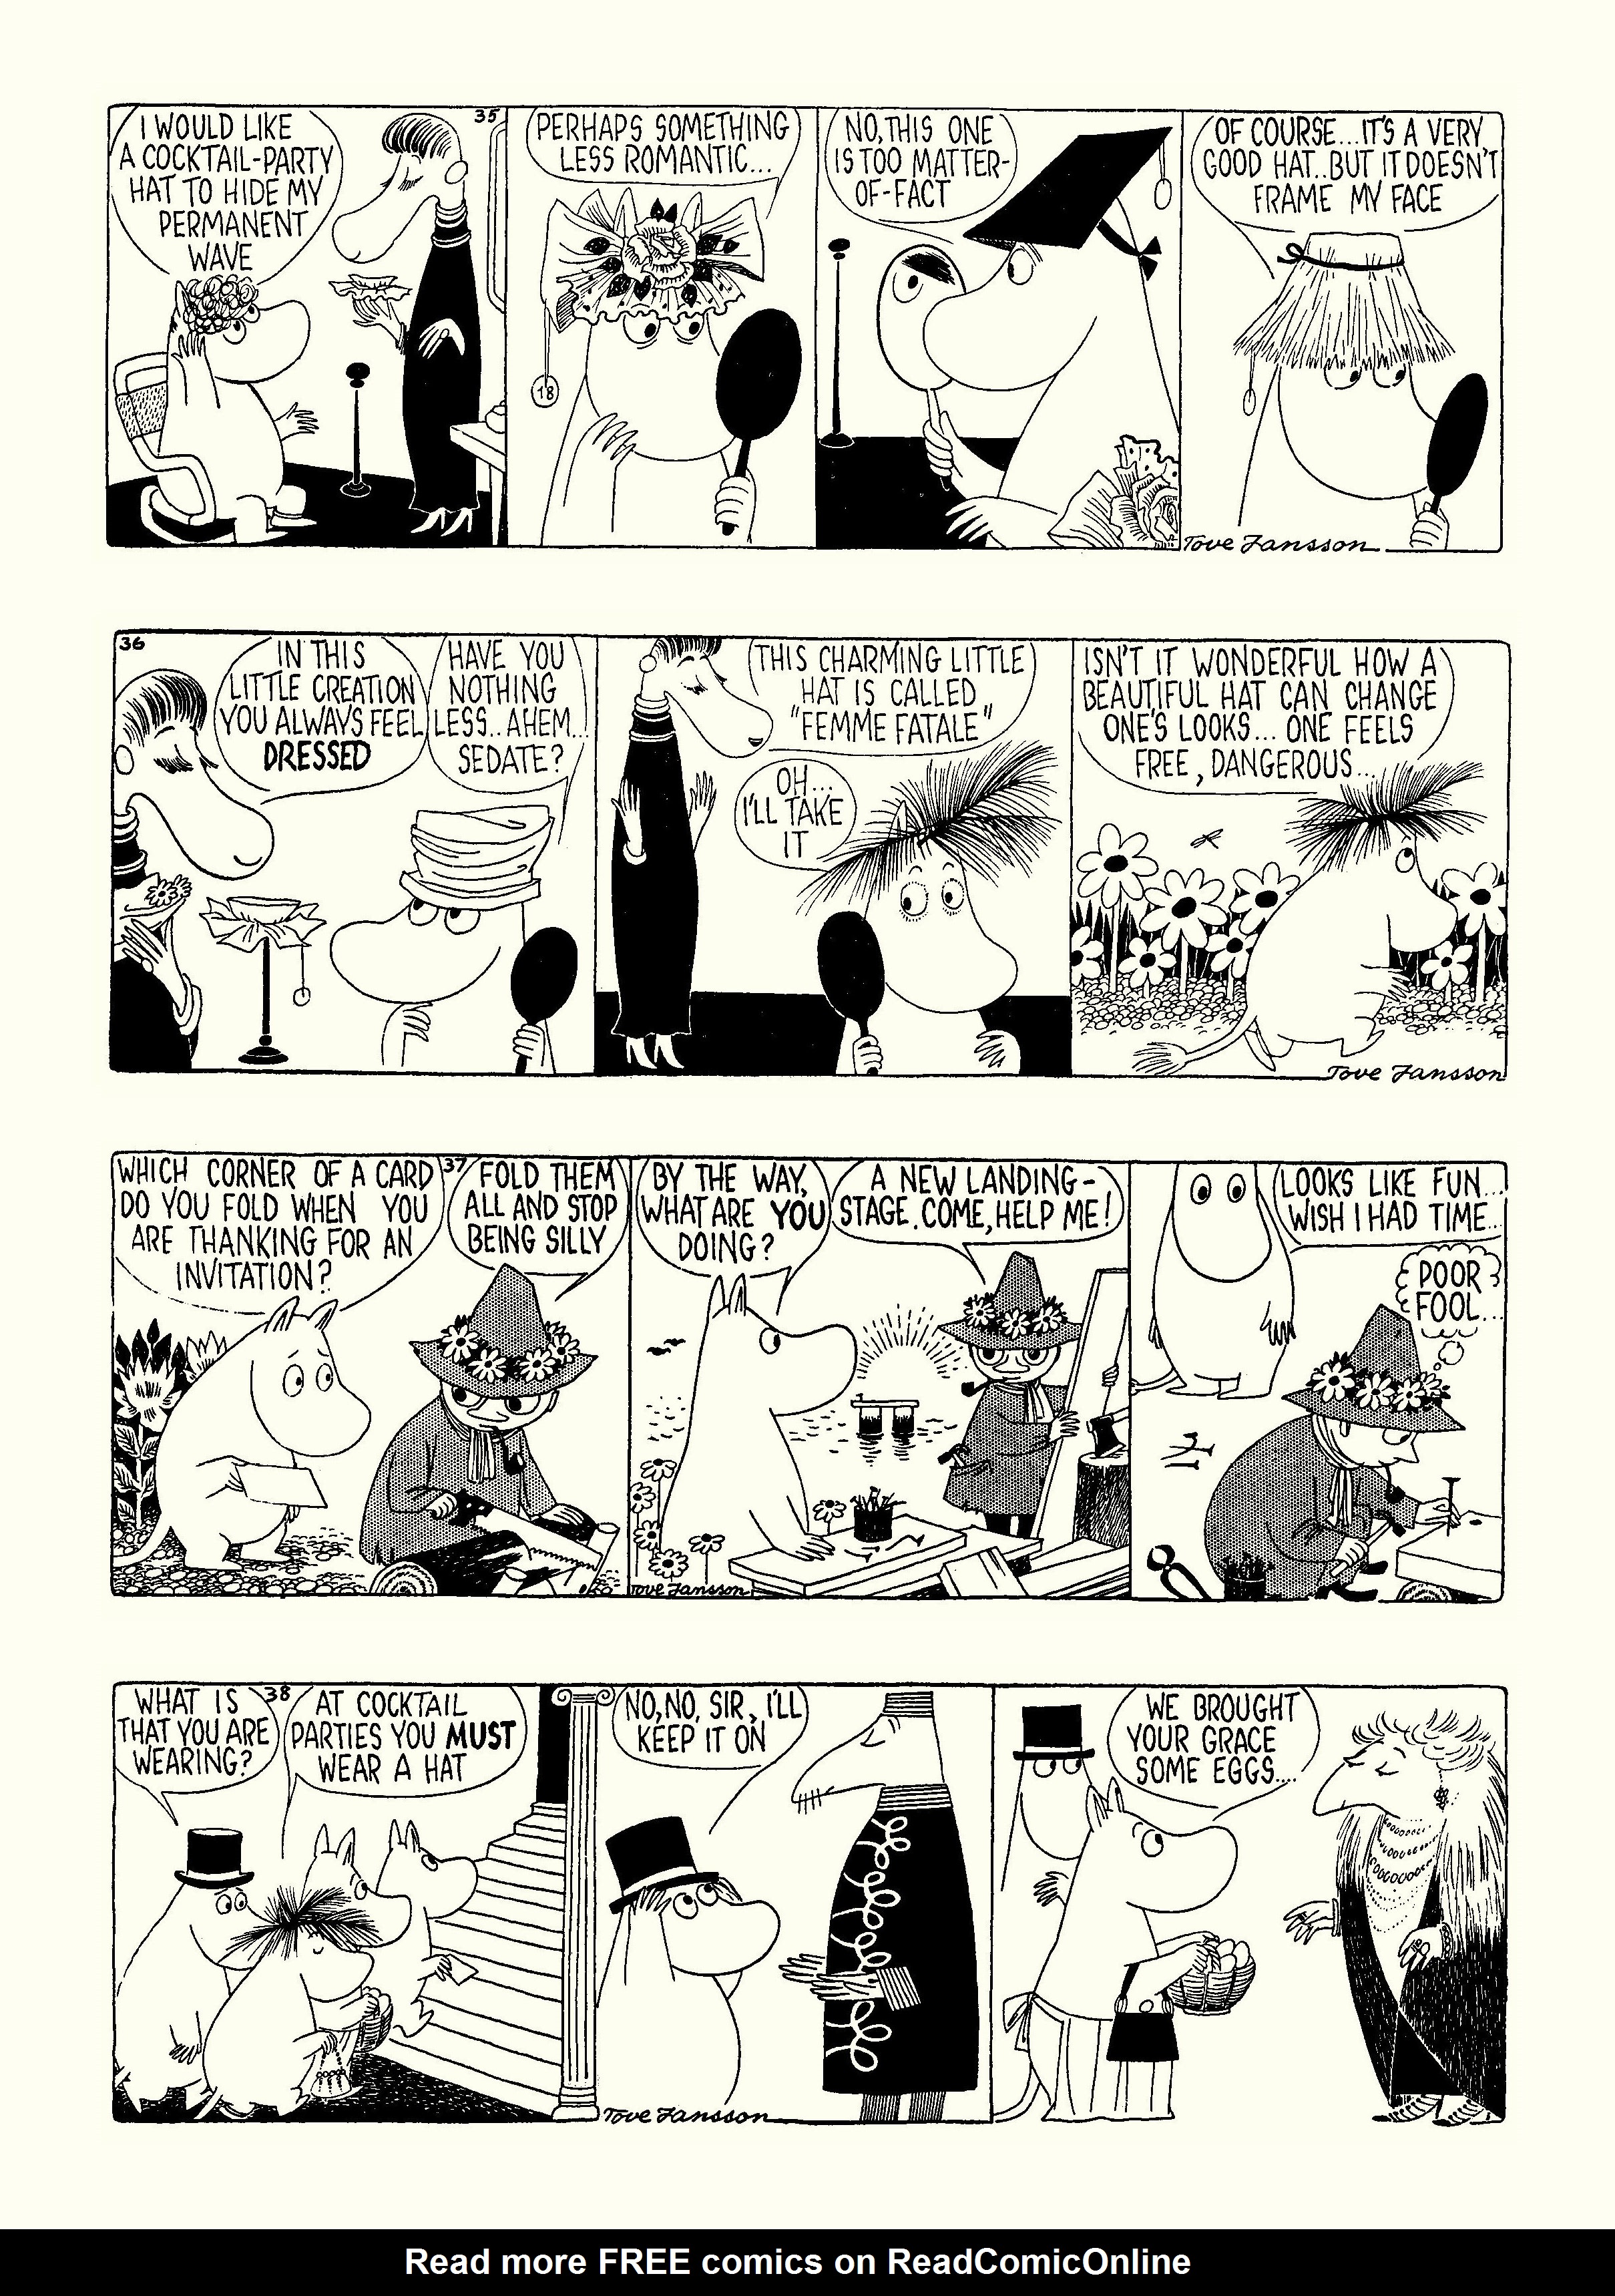 Read online Moomin: The Complete Tove Jansson Comic Strip comic -  Issue # TPB 4 - 88